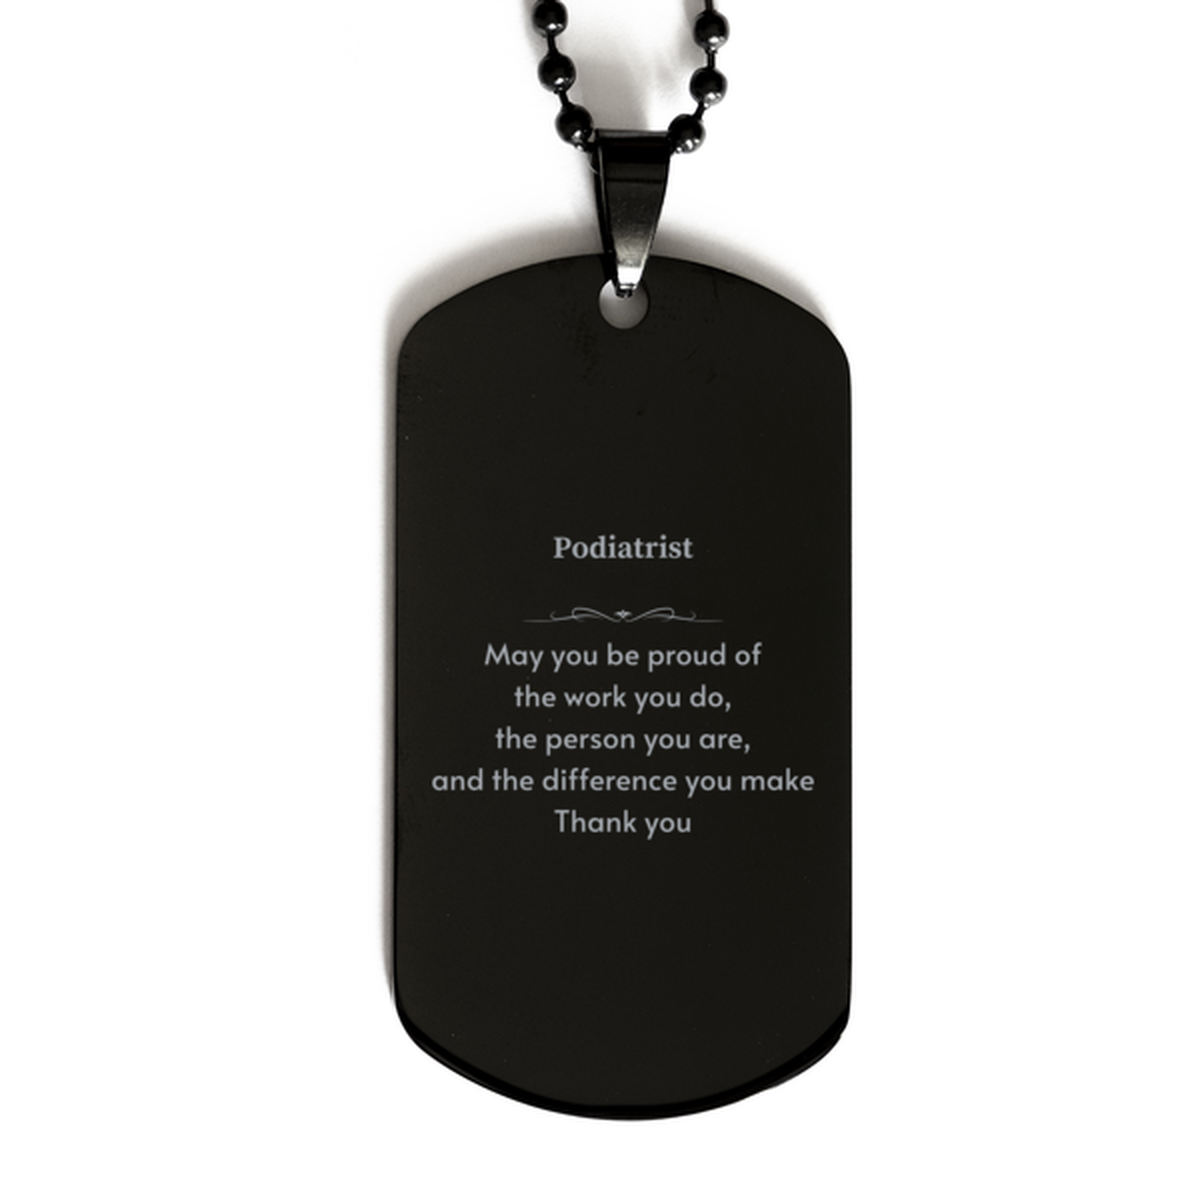 Heartwarming Black Dog Tag Retirement Coworkers Gifts for Podiatrist, Podiatrist May You be proud of the work you do, the person you are Gifts for Boss Men Women Friends